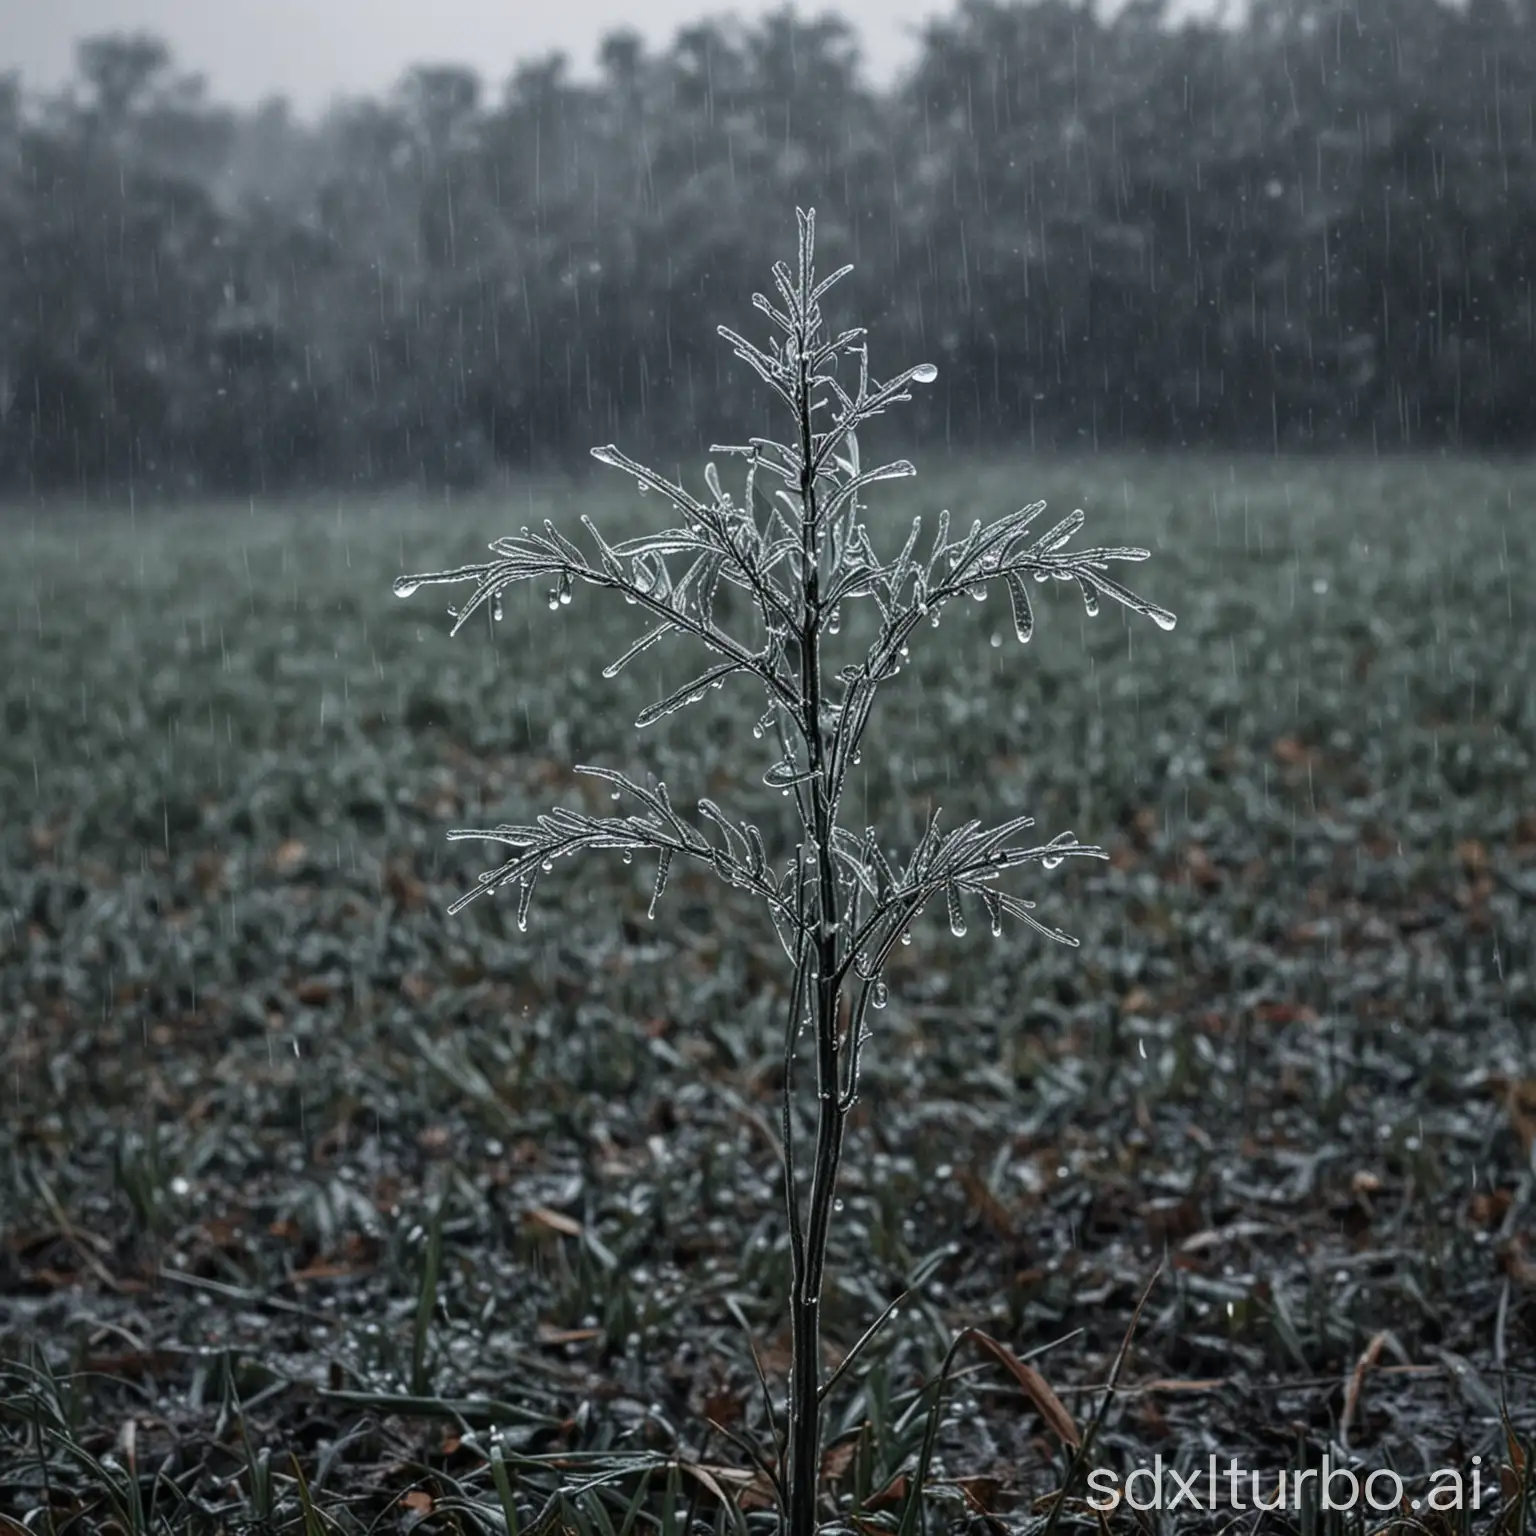 Ethereal-Frost-A-Desolate-Landscape-in-the-Heart-of-Winter